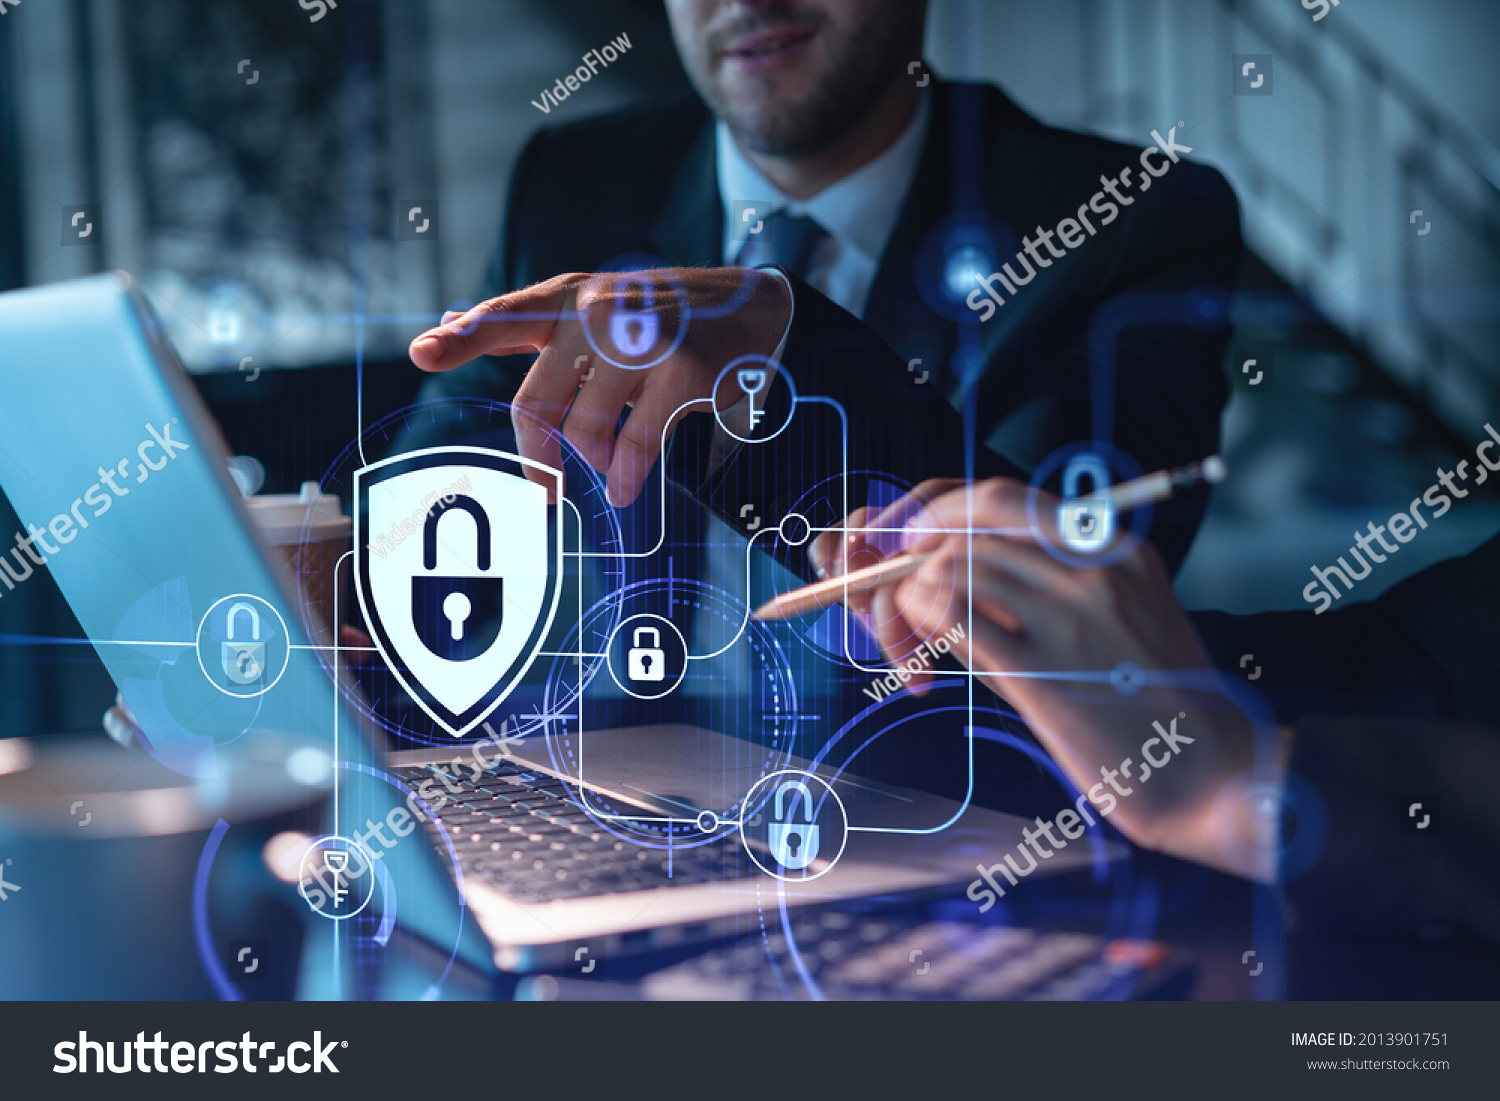 Two colleagues working together to protect clients confidential information and cyber security. IT hologram padlock icons modern office background at night time #2013901751